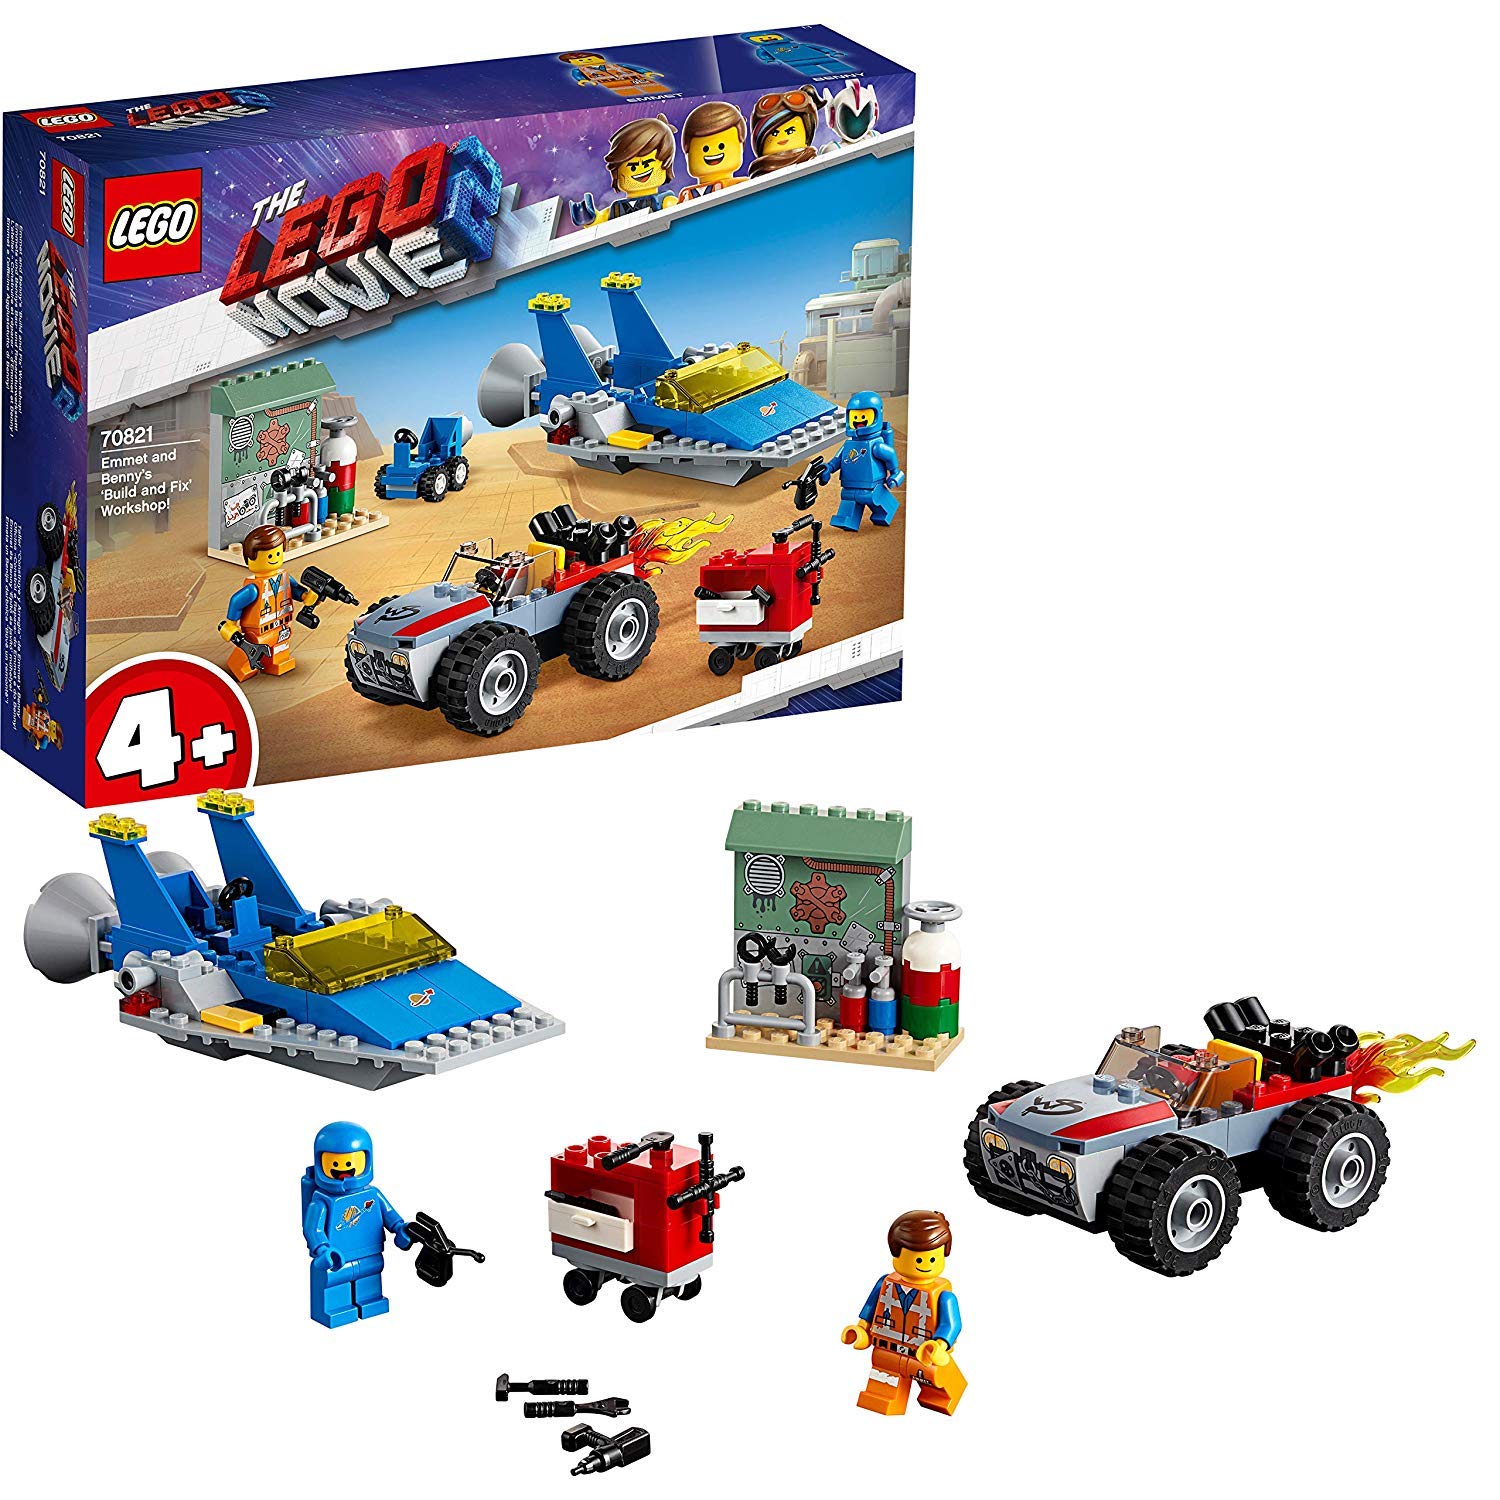 THE LEGO MOVIE 2 70821 Emmets and Benny's building and repair workshop